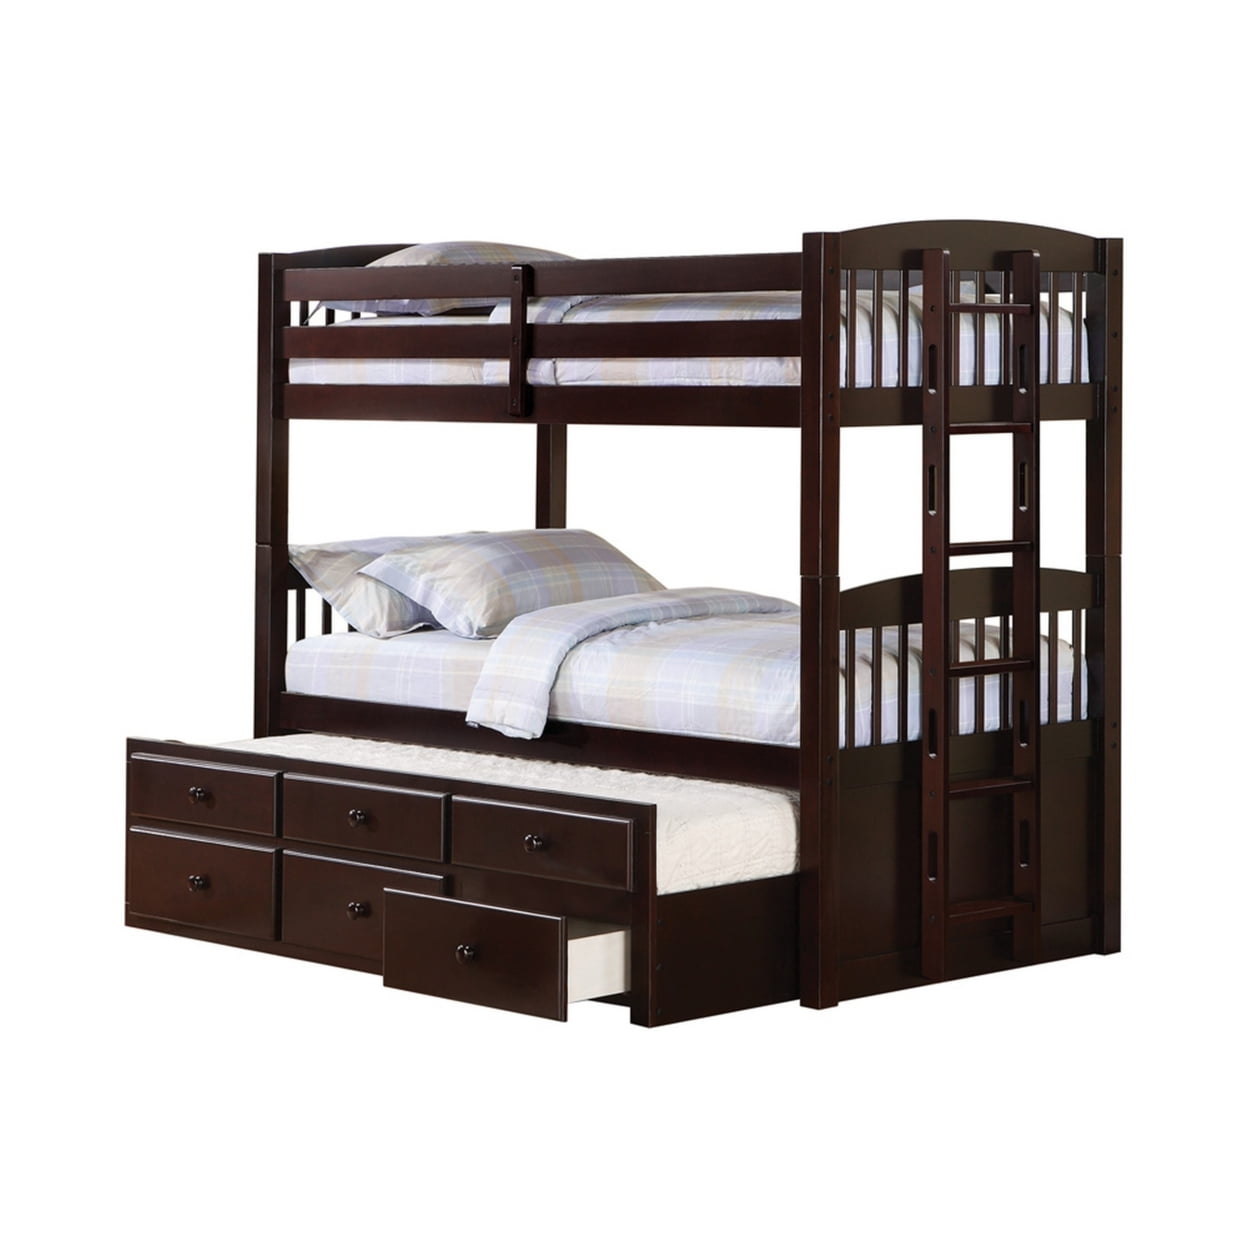 Bm215937 Wooden Twin Over Twin Size Bunk Bed With Guard Rails & Bottom Drawers, Brown - 69.5 X 83.75 X 42.5 In.